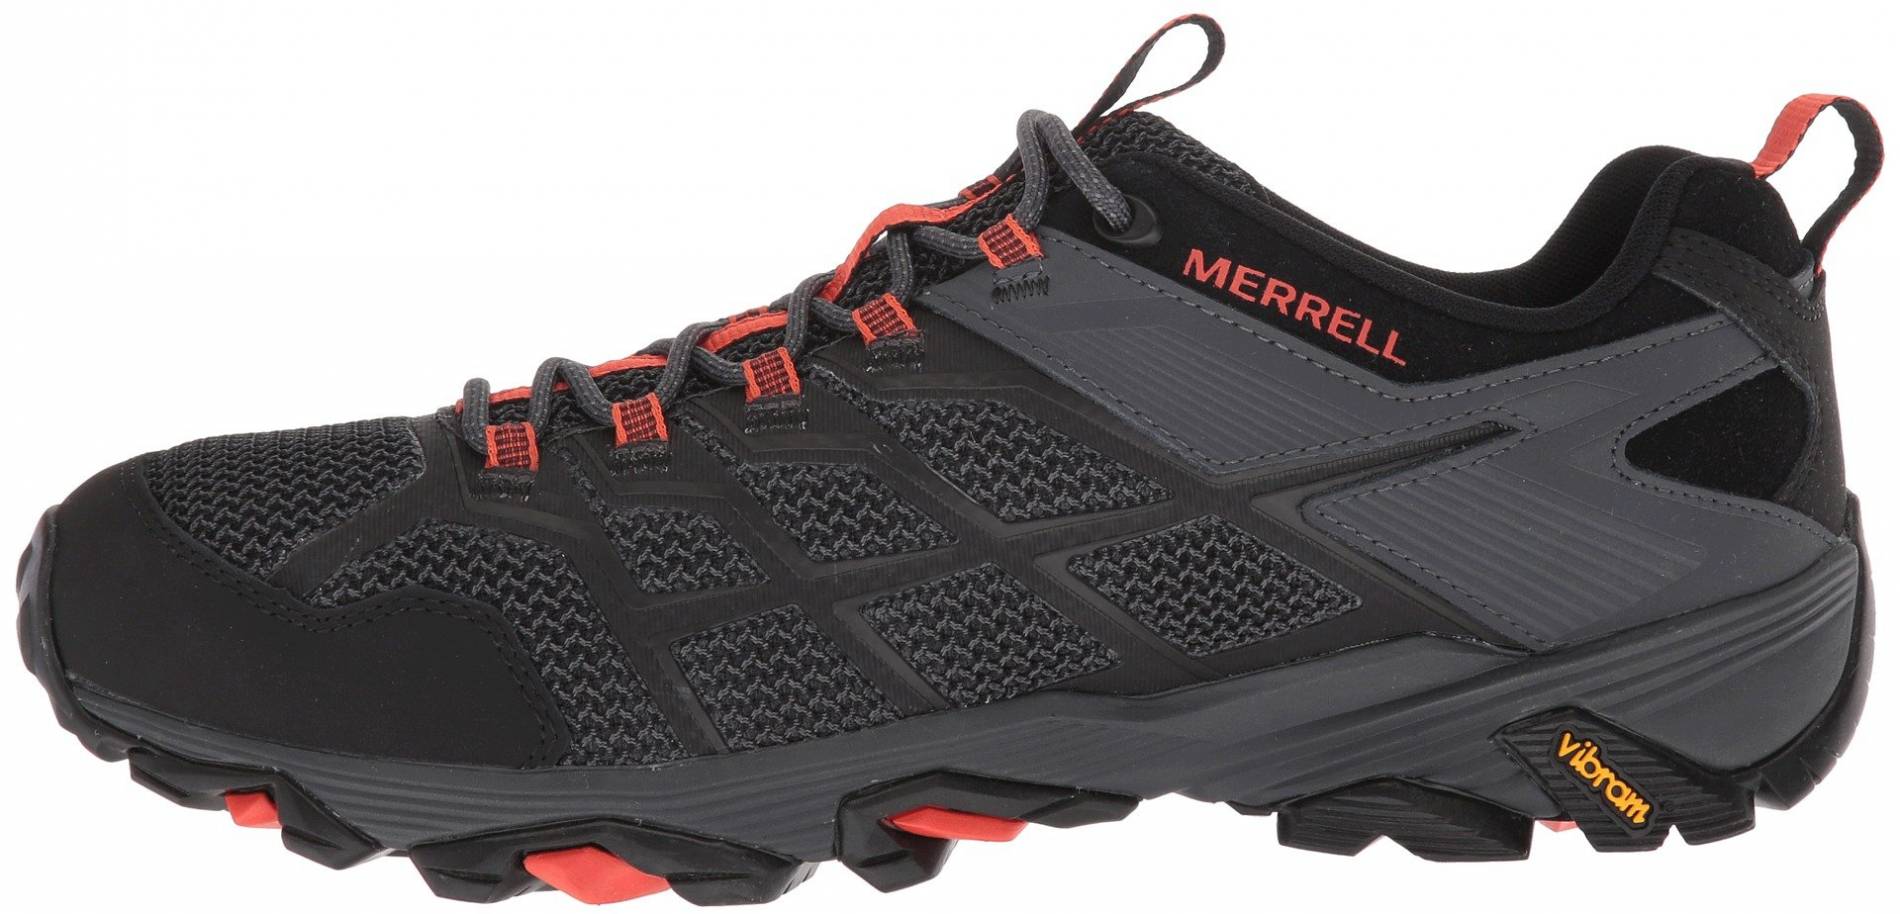 Only $50 + Review of Merrell Moab FST 2 